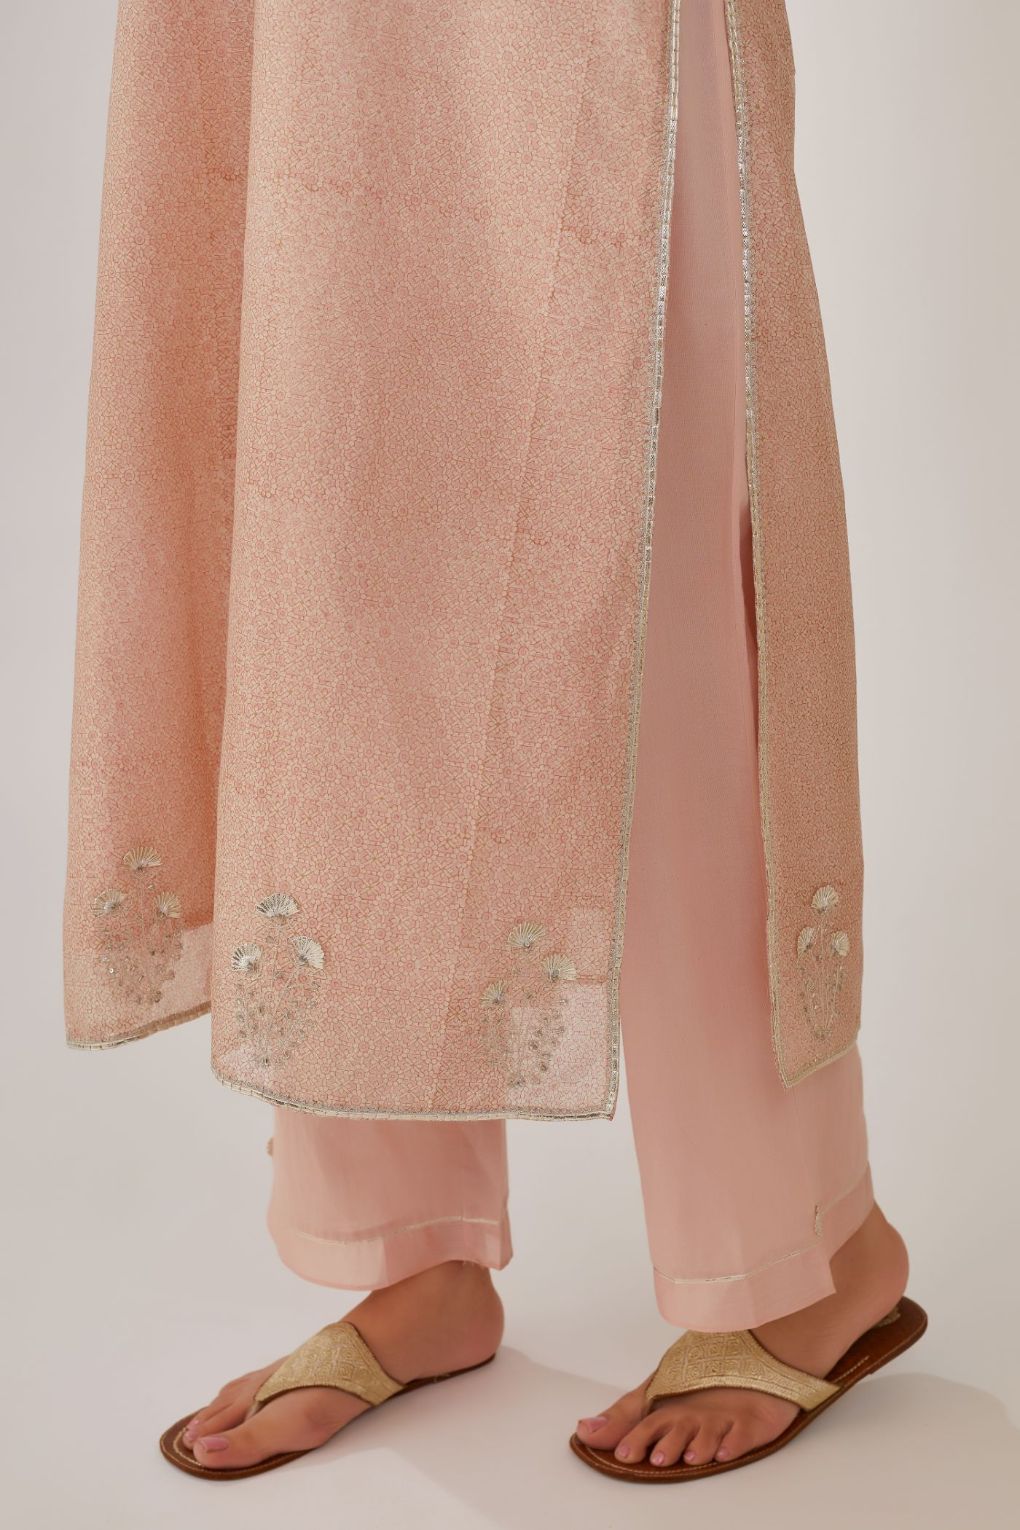 Pink hand block printed silk chanderi kurta with silver gota embroidery, paired with pink straight pants with gota and silk chanderi fabric detaling at bottom hem